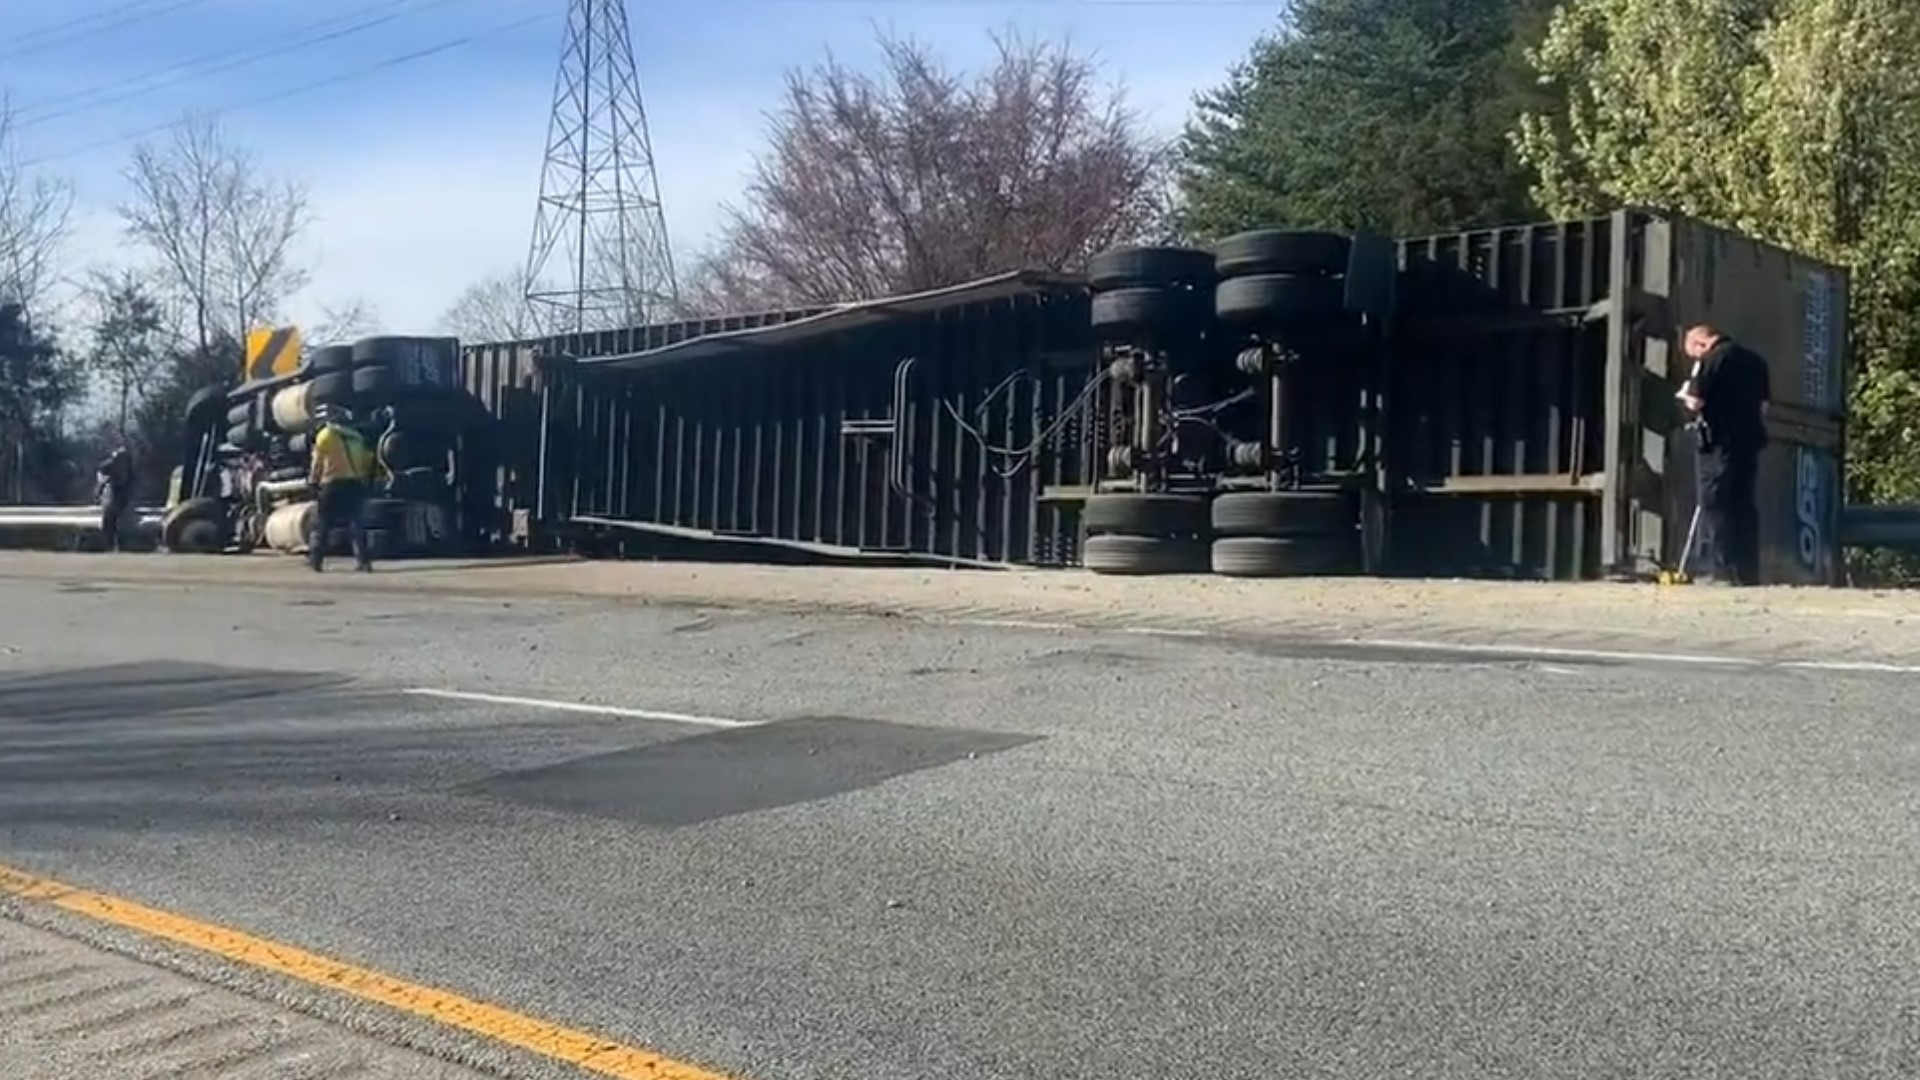 Emergency crews are on the scene of an overturned tractor-trailer on I-40 W near 311 N. Fire officials said to expect extended delays.